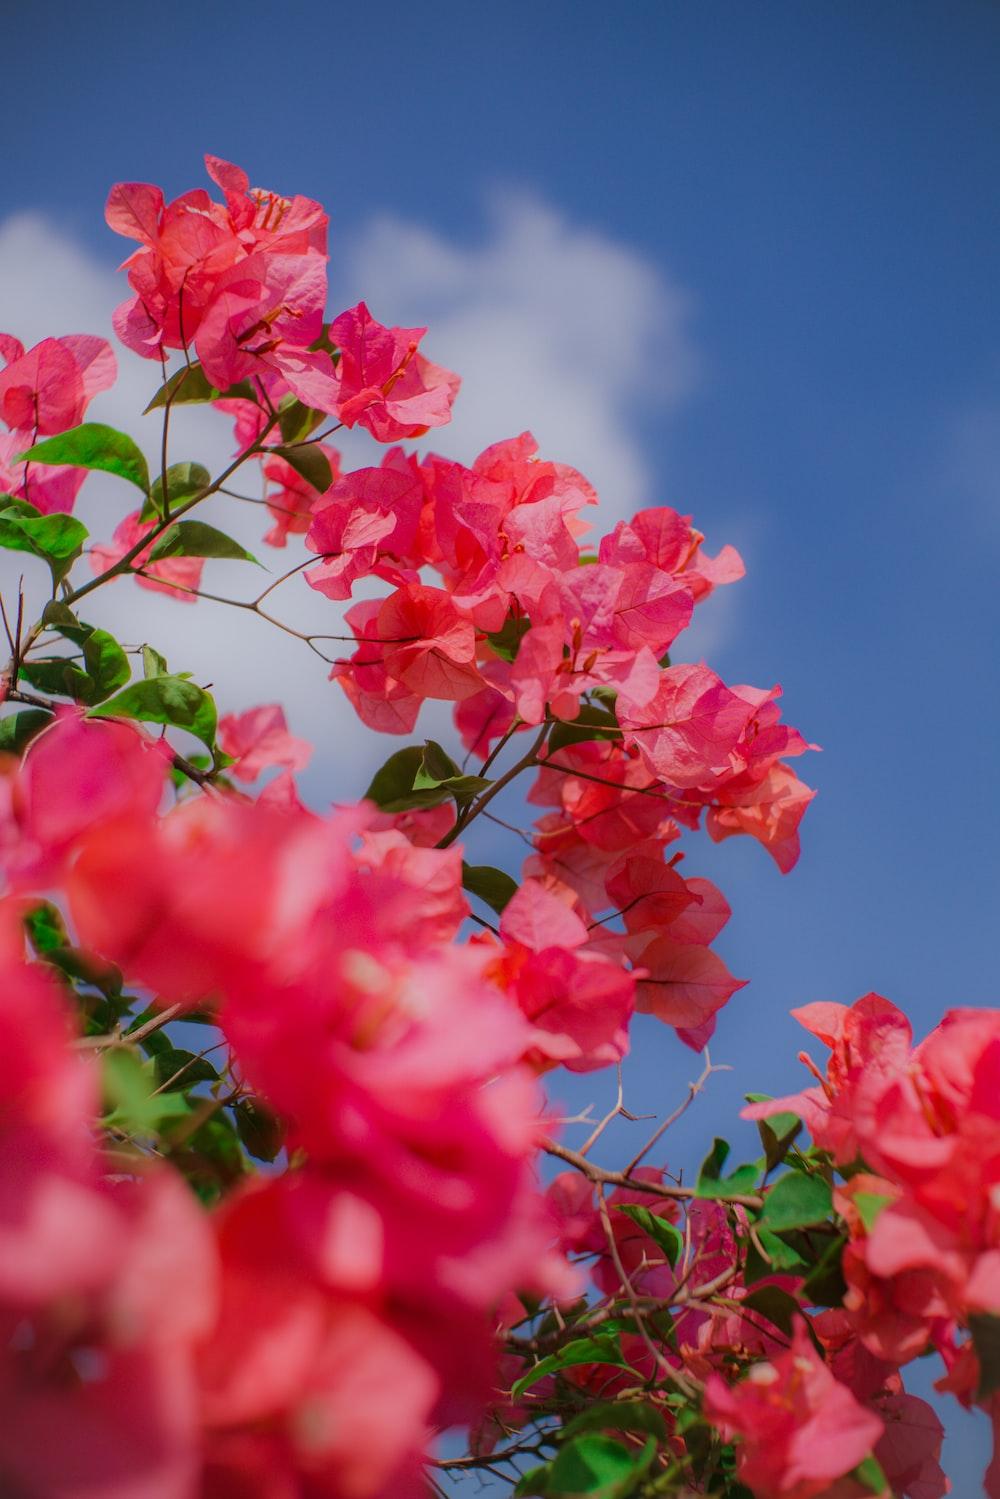 Red Flowers Under Blue Sky During Daytime Photo Flower